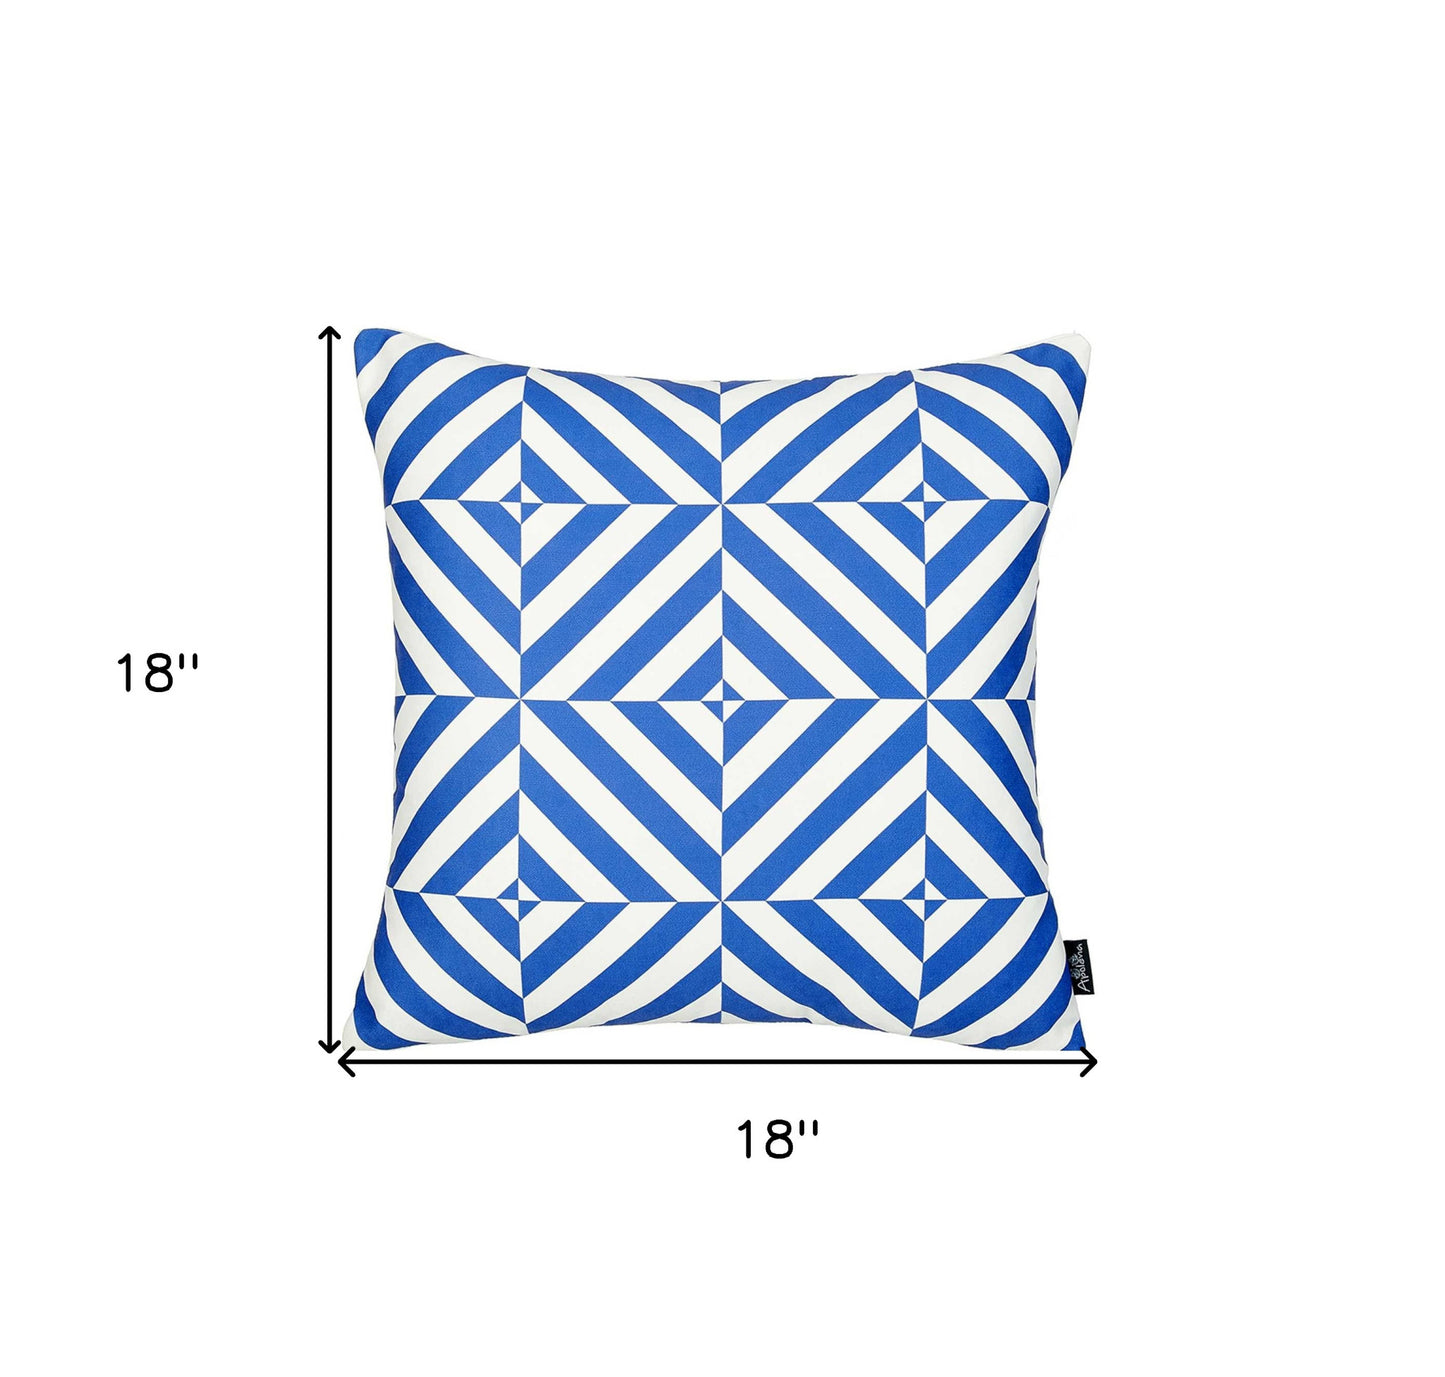 Blue And White Geometric Squares Decorative Throw Pillow Cover